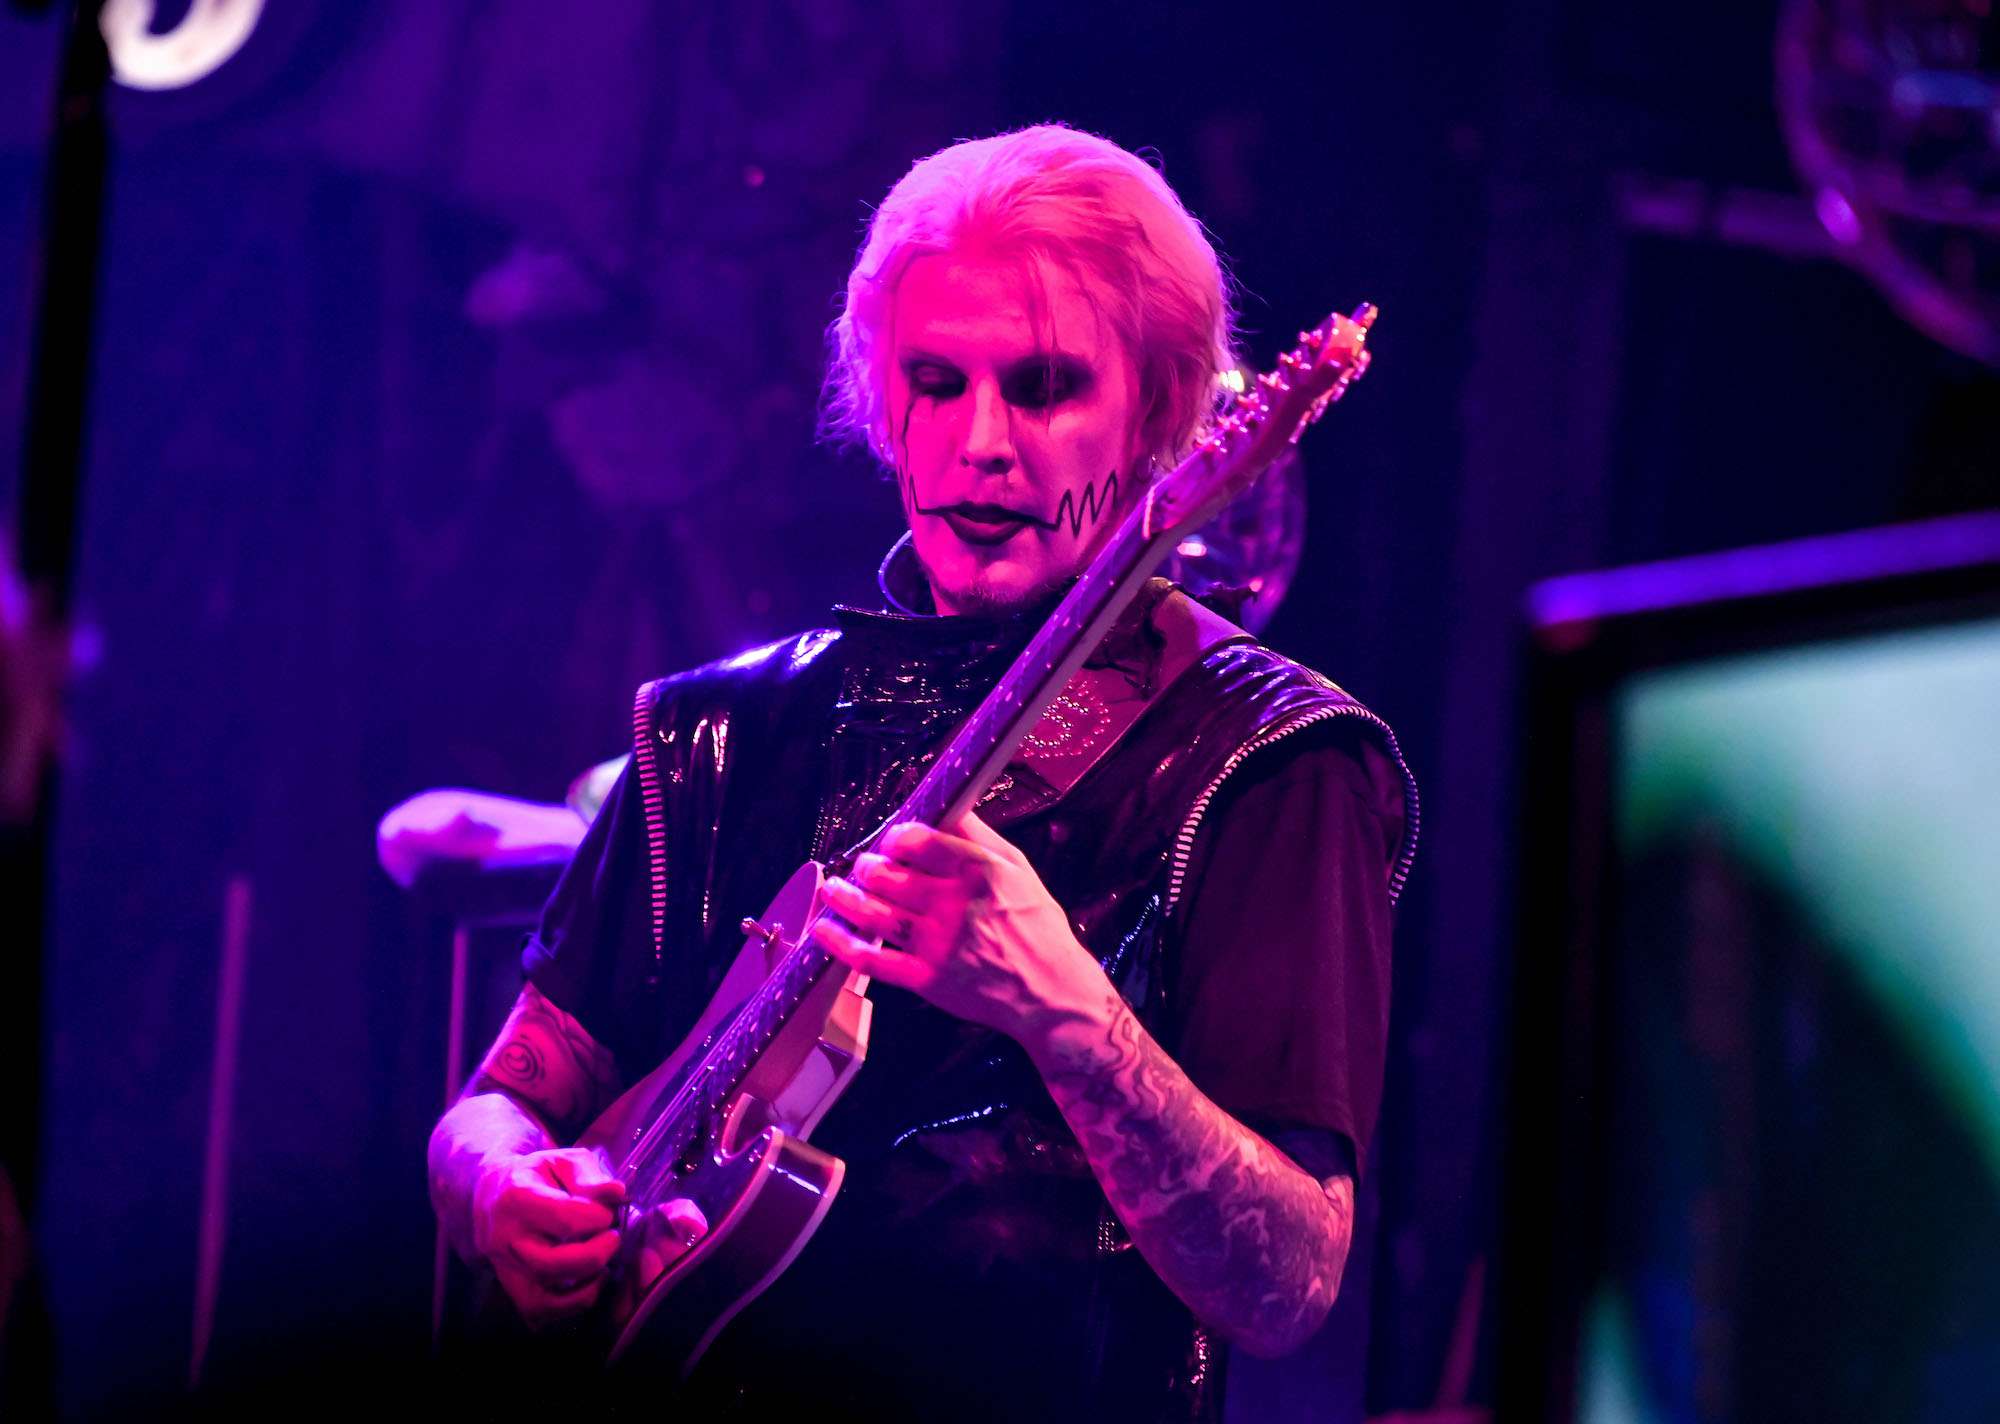 John 5 Live at The Forge [GALLERY] 16